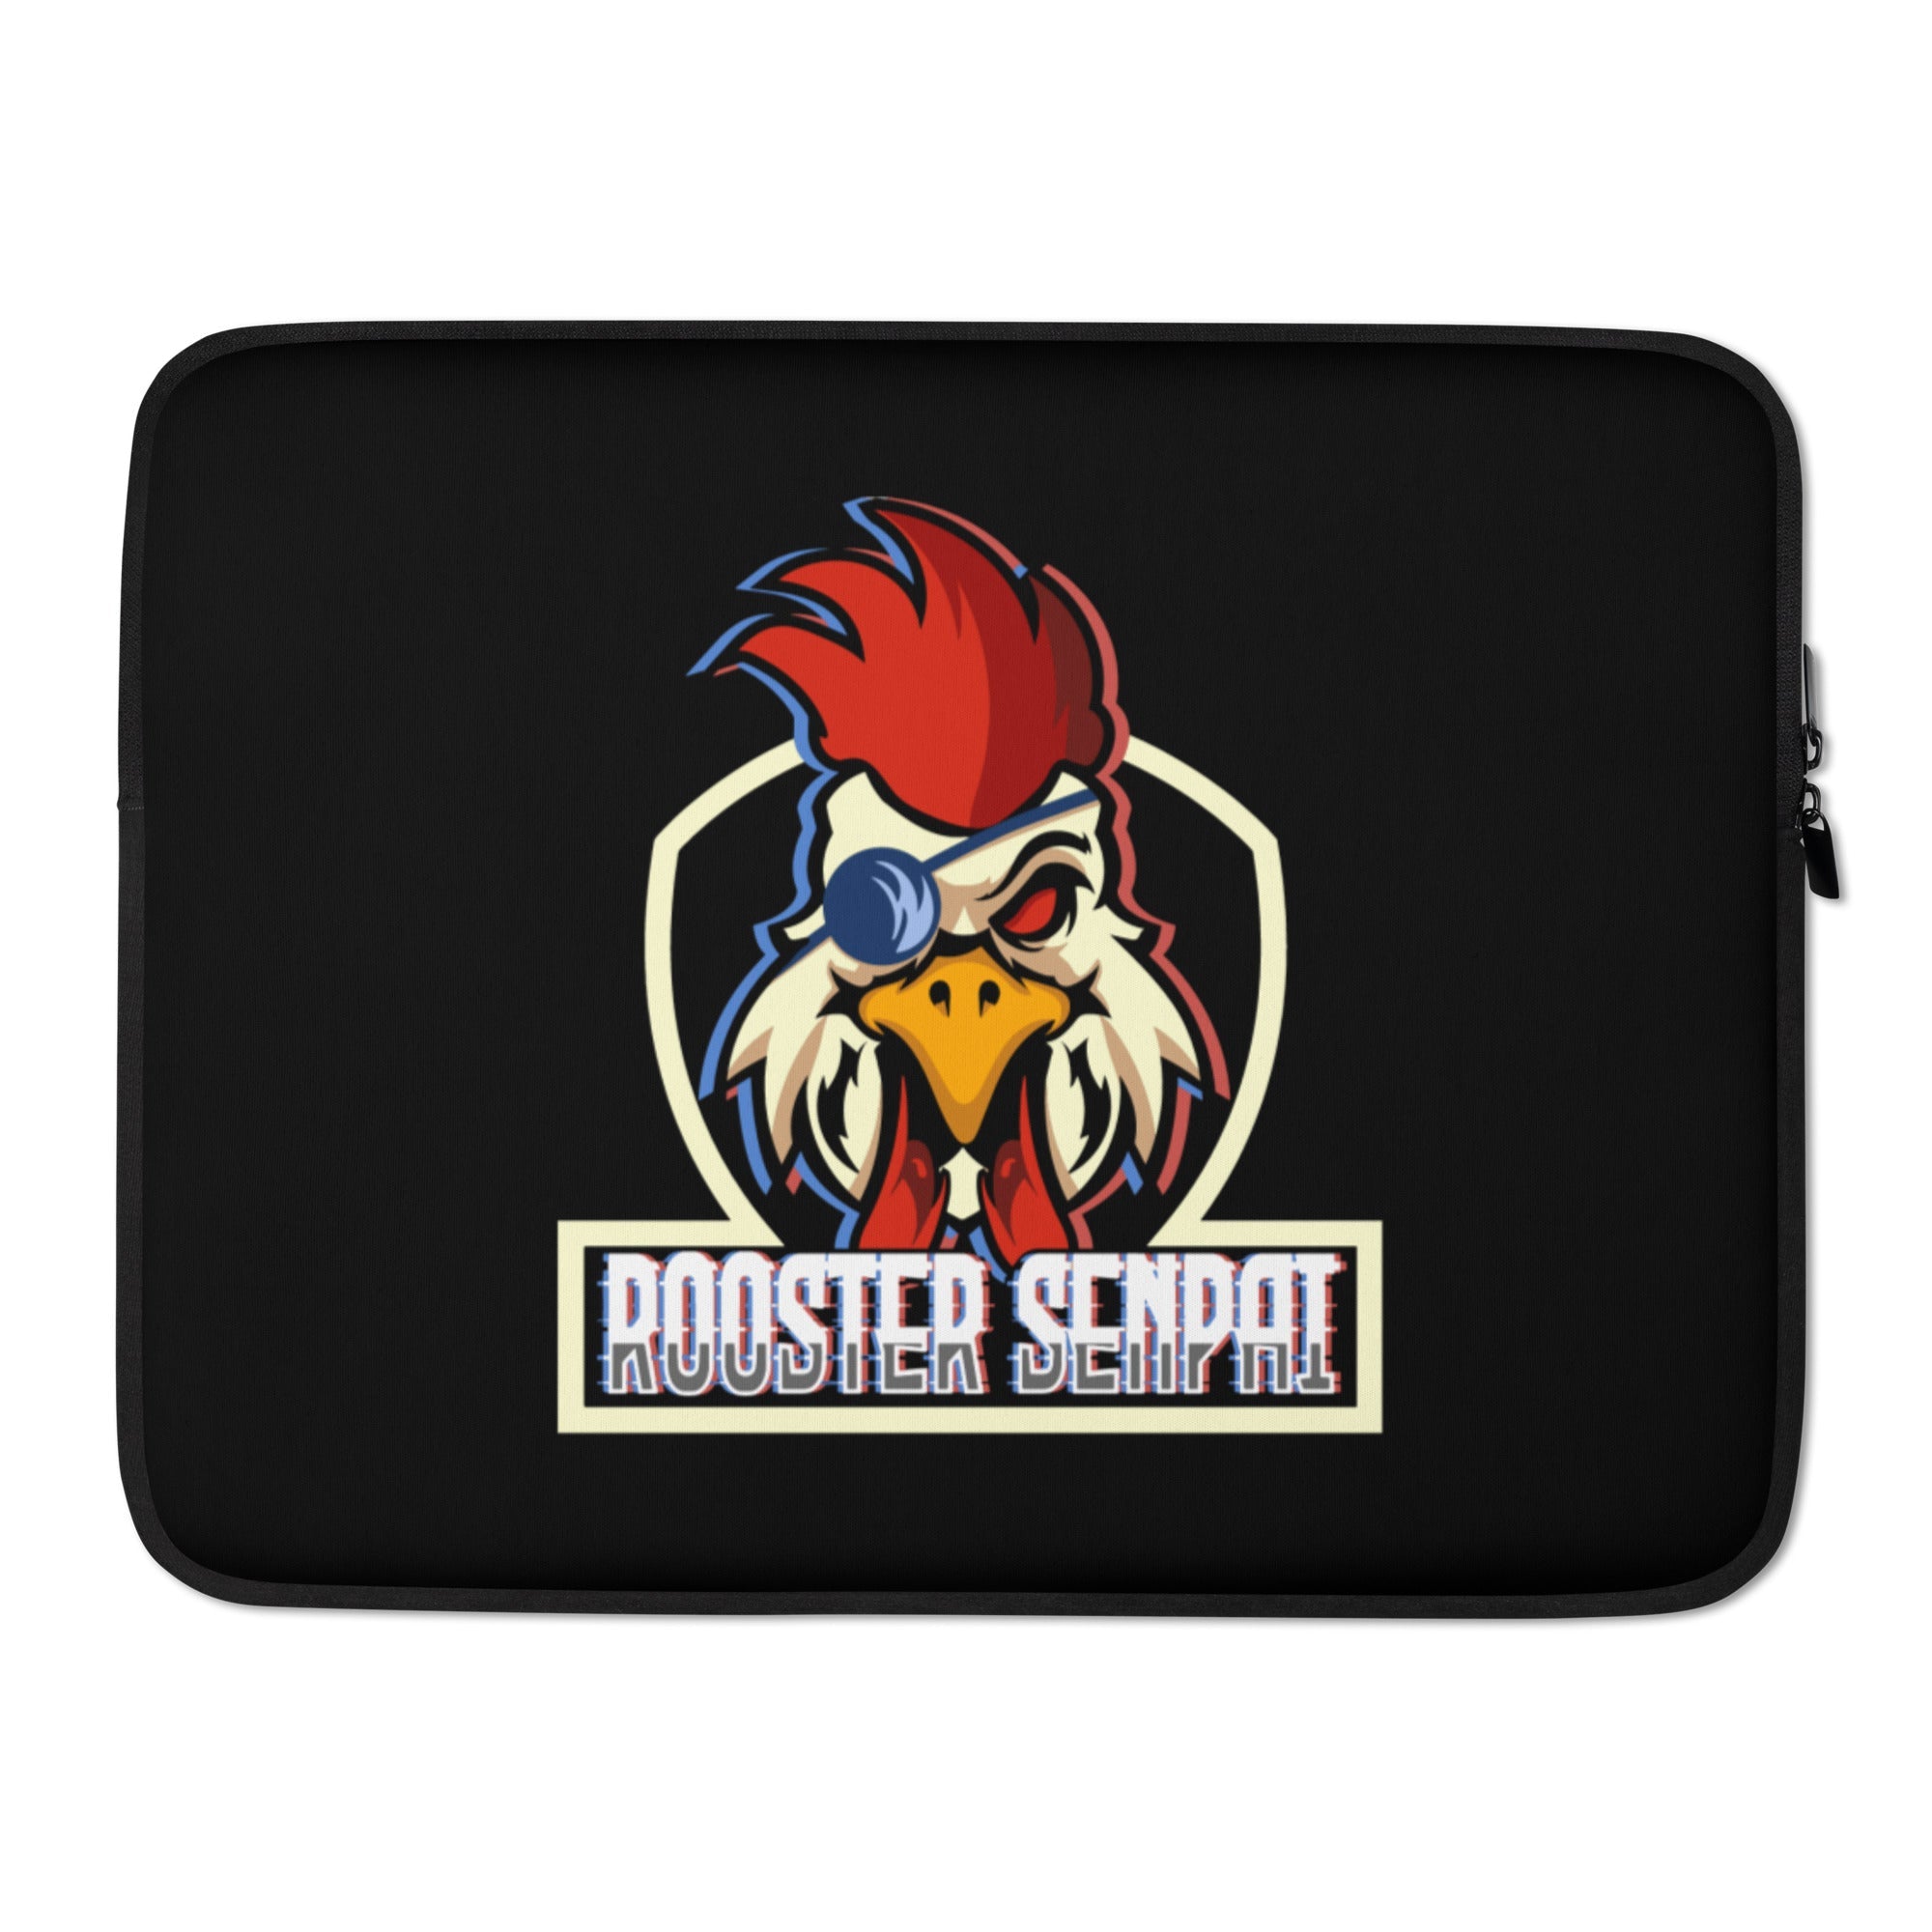 RS Laptop Sleeve